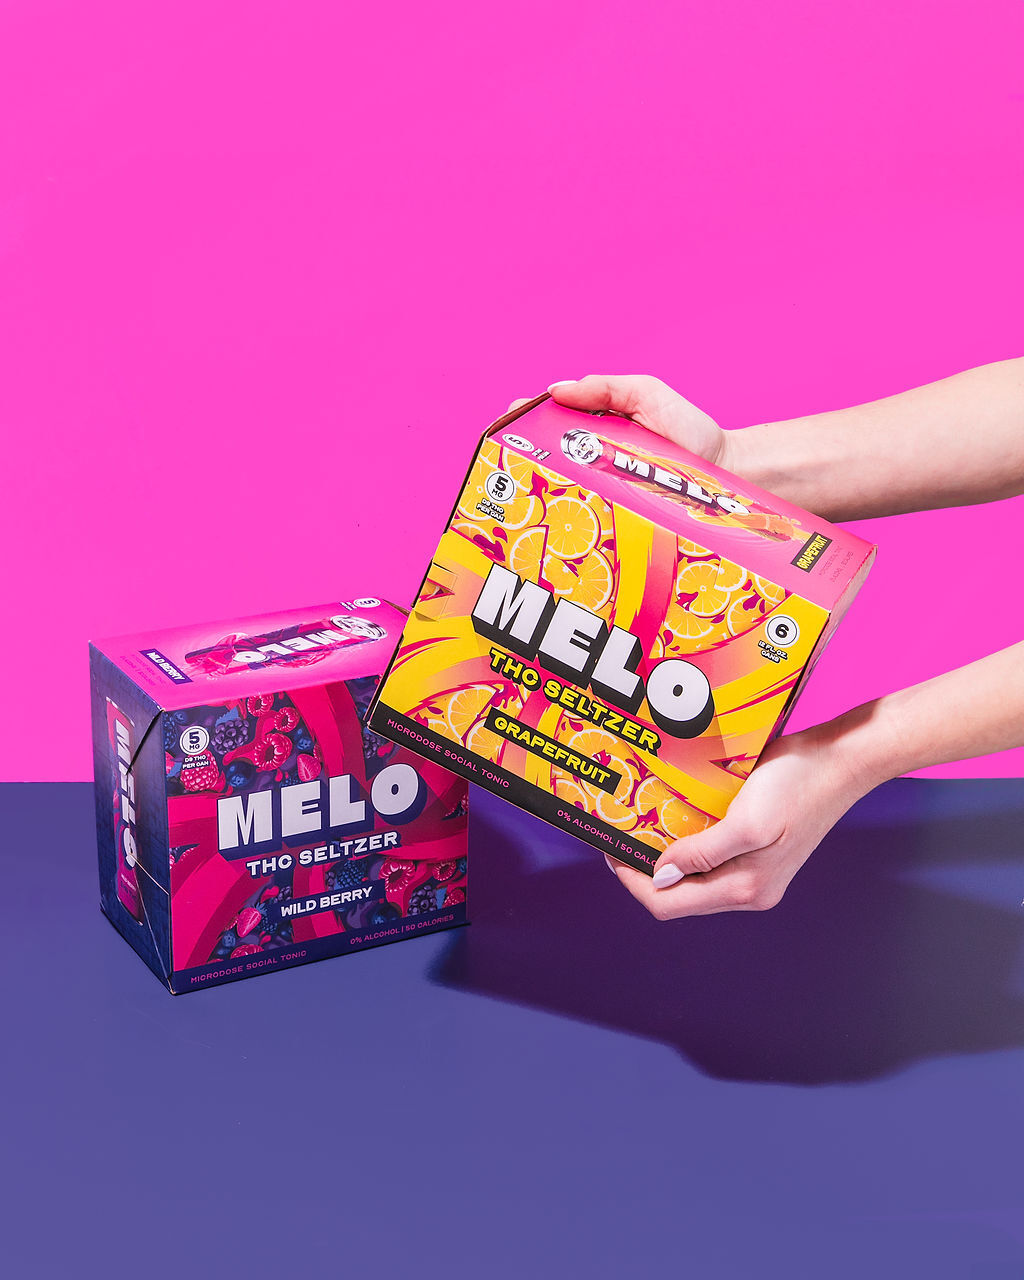 Chill Vibes: A Fun Review of Melo’s THC Beverages in Grapefruit and Wild Berries Flavors